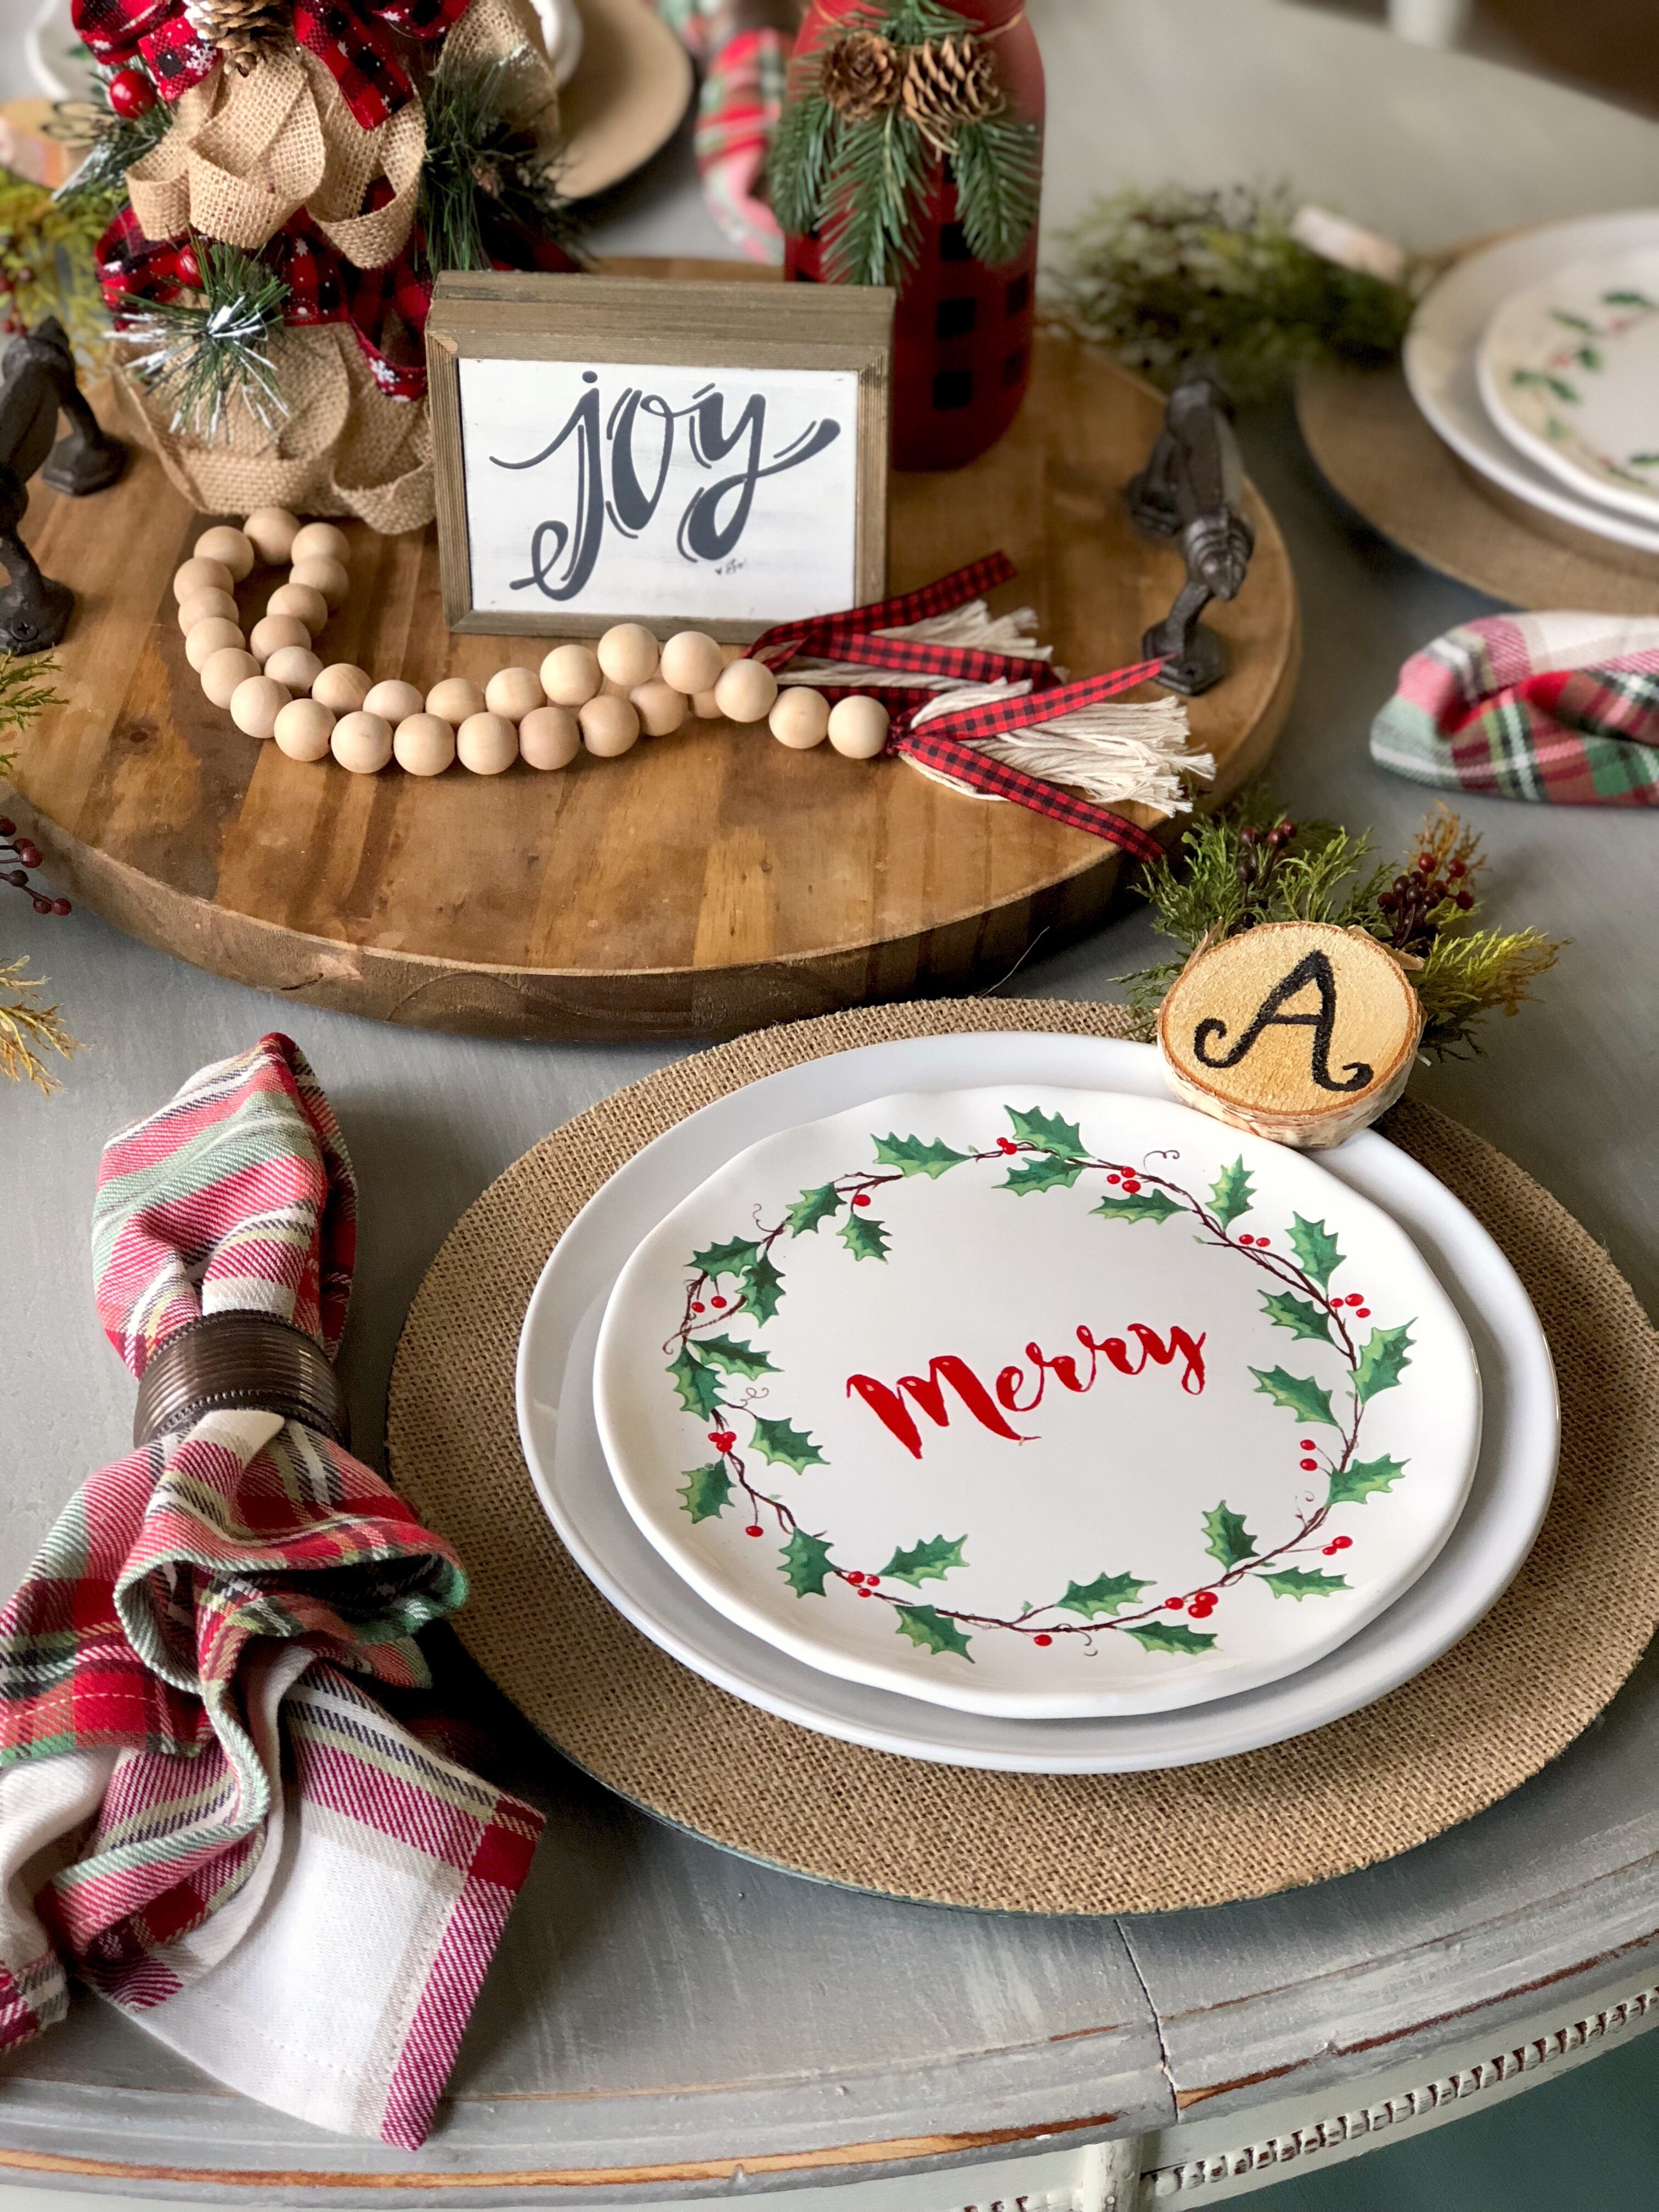 How to put together an easy Christmas table setting that’s cute and creative!